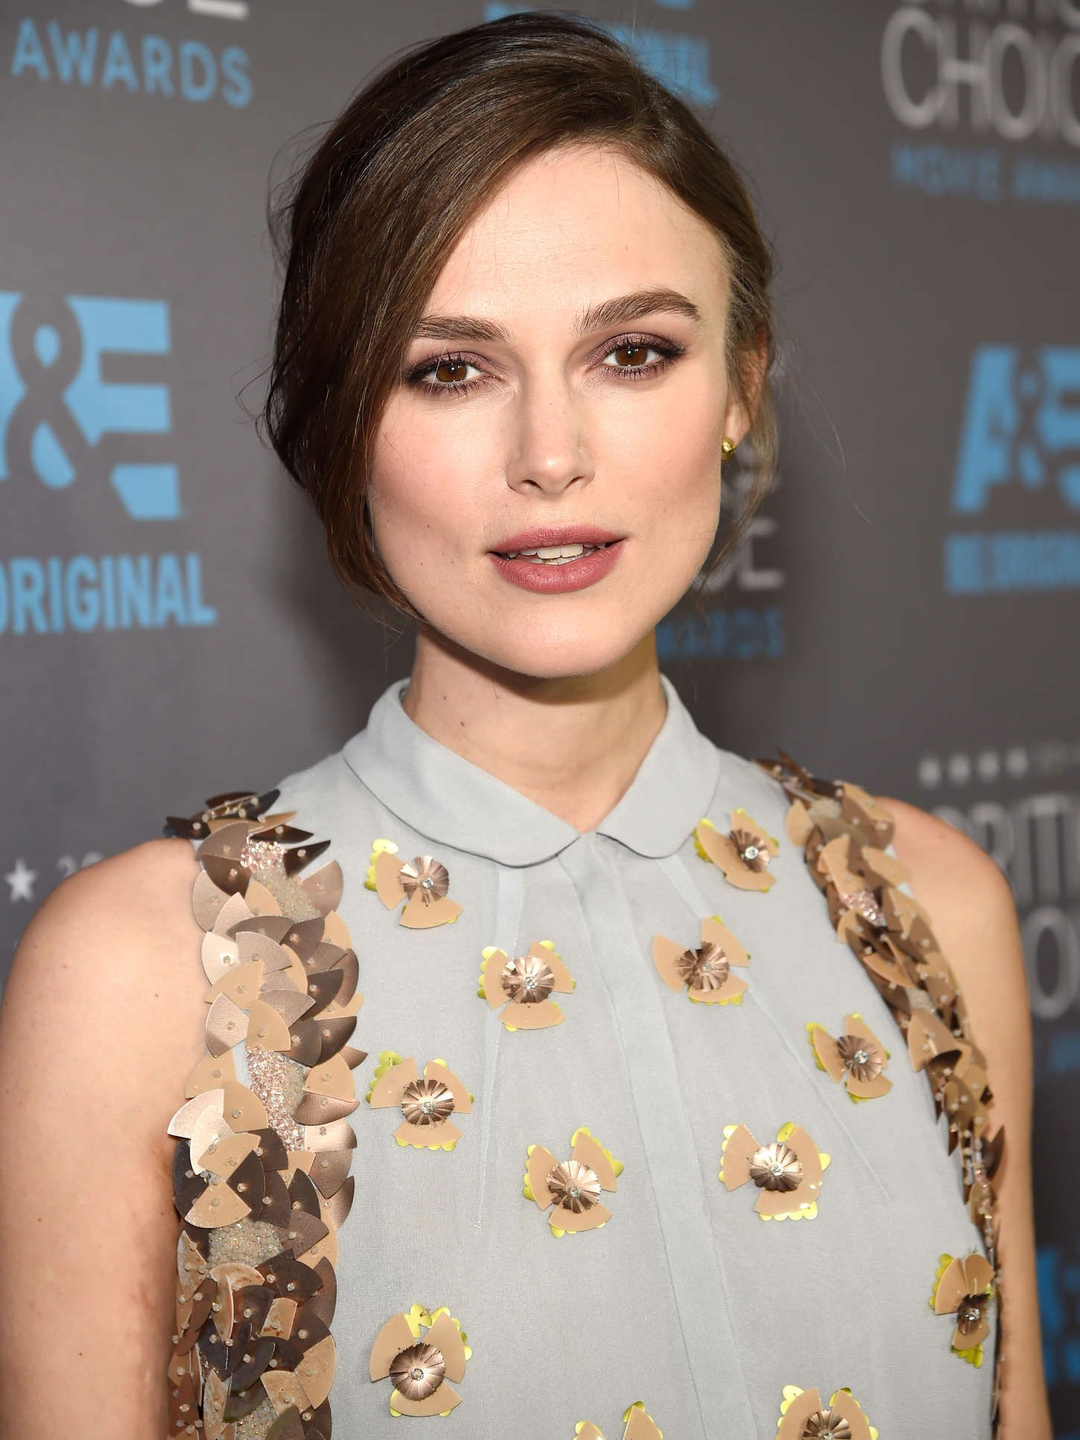 Keira Knightley way to fame